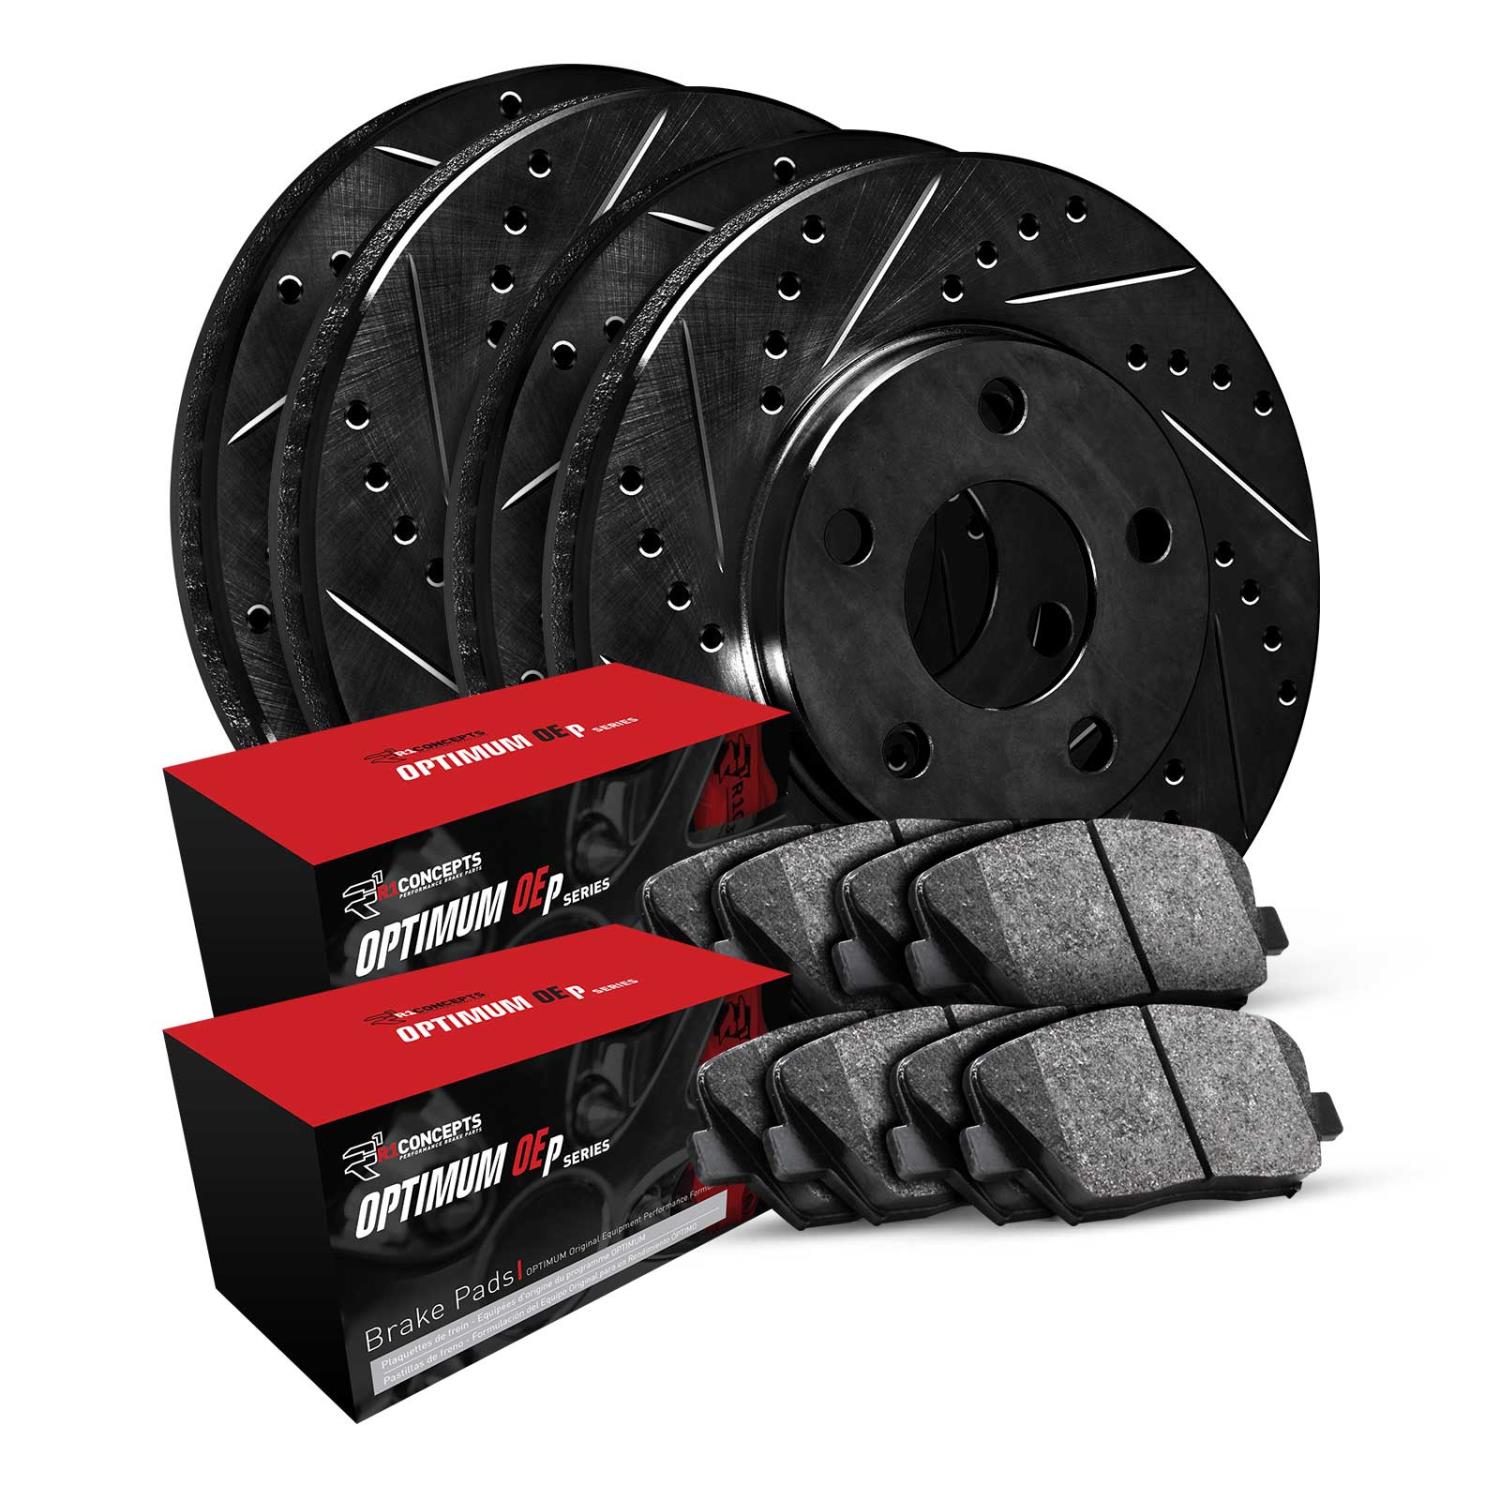 E-Line Drilled & Slotted Black Brake Rotor & Drum Set w/Optimum OE Pads & Shoes, 1991-1992 Fits Multiple Makes/Models